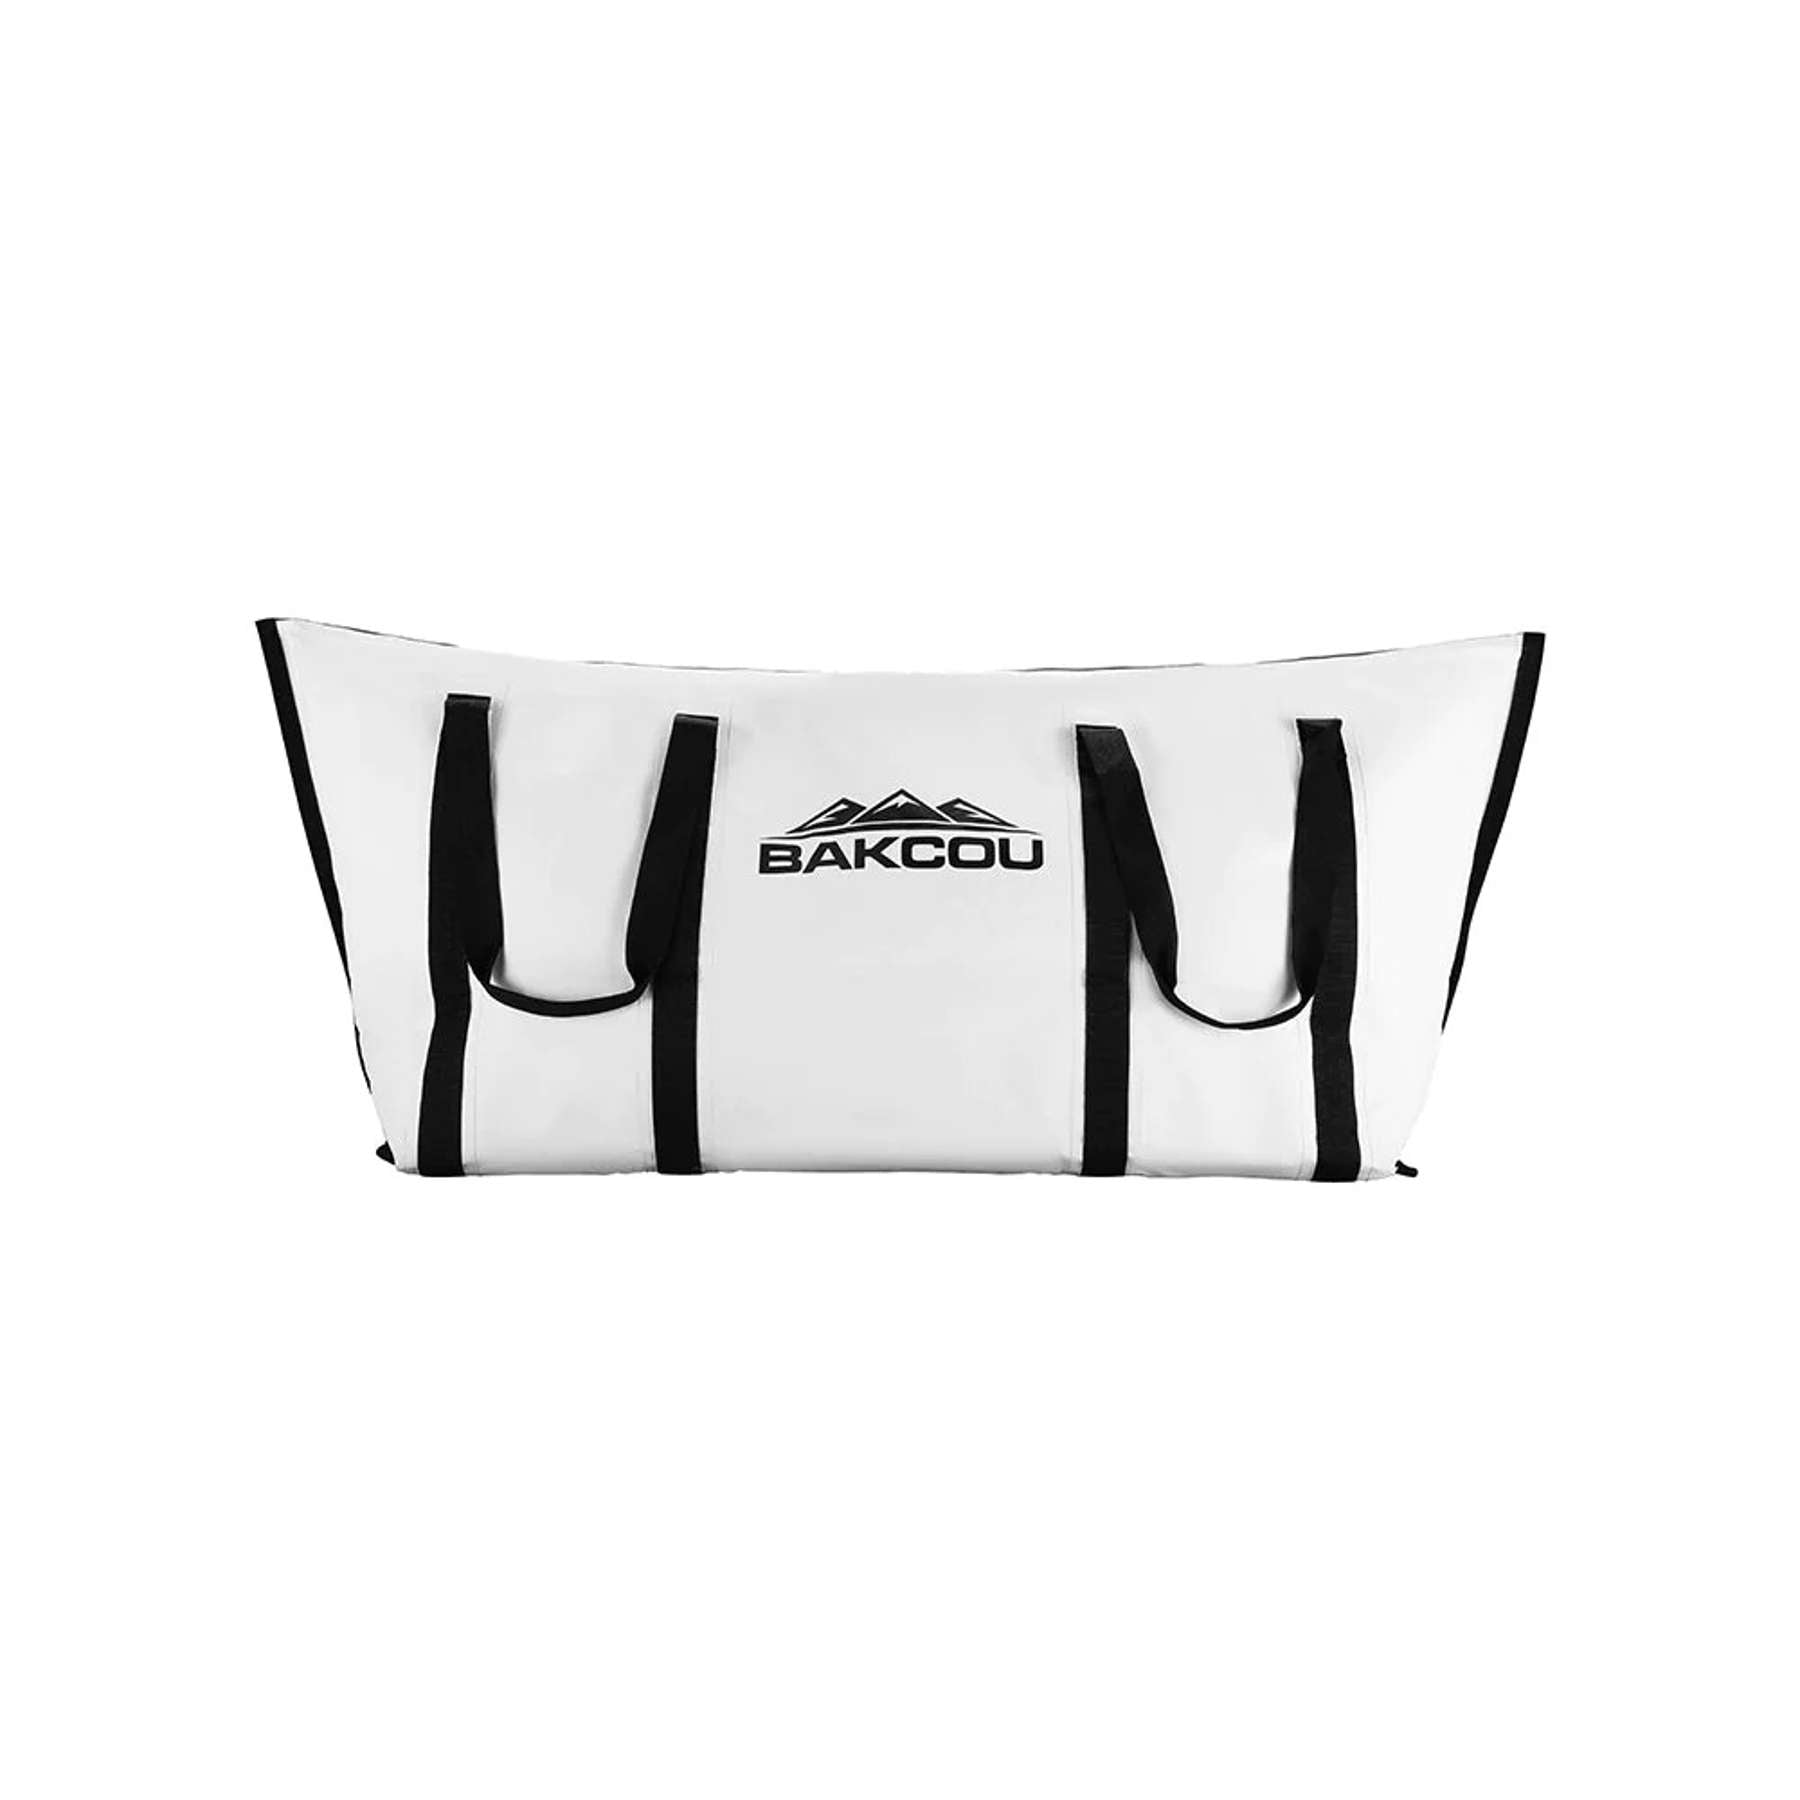 Insulated Game-Gear Bags